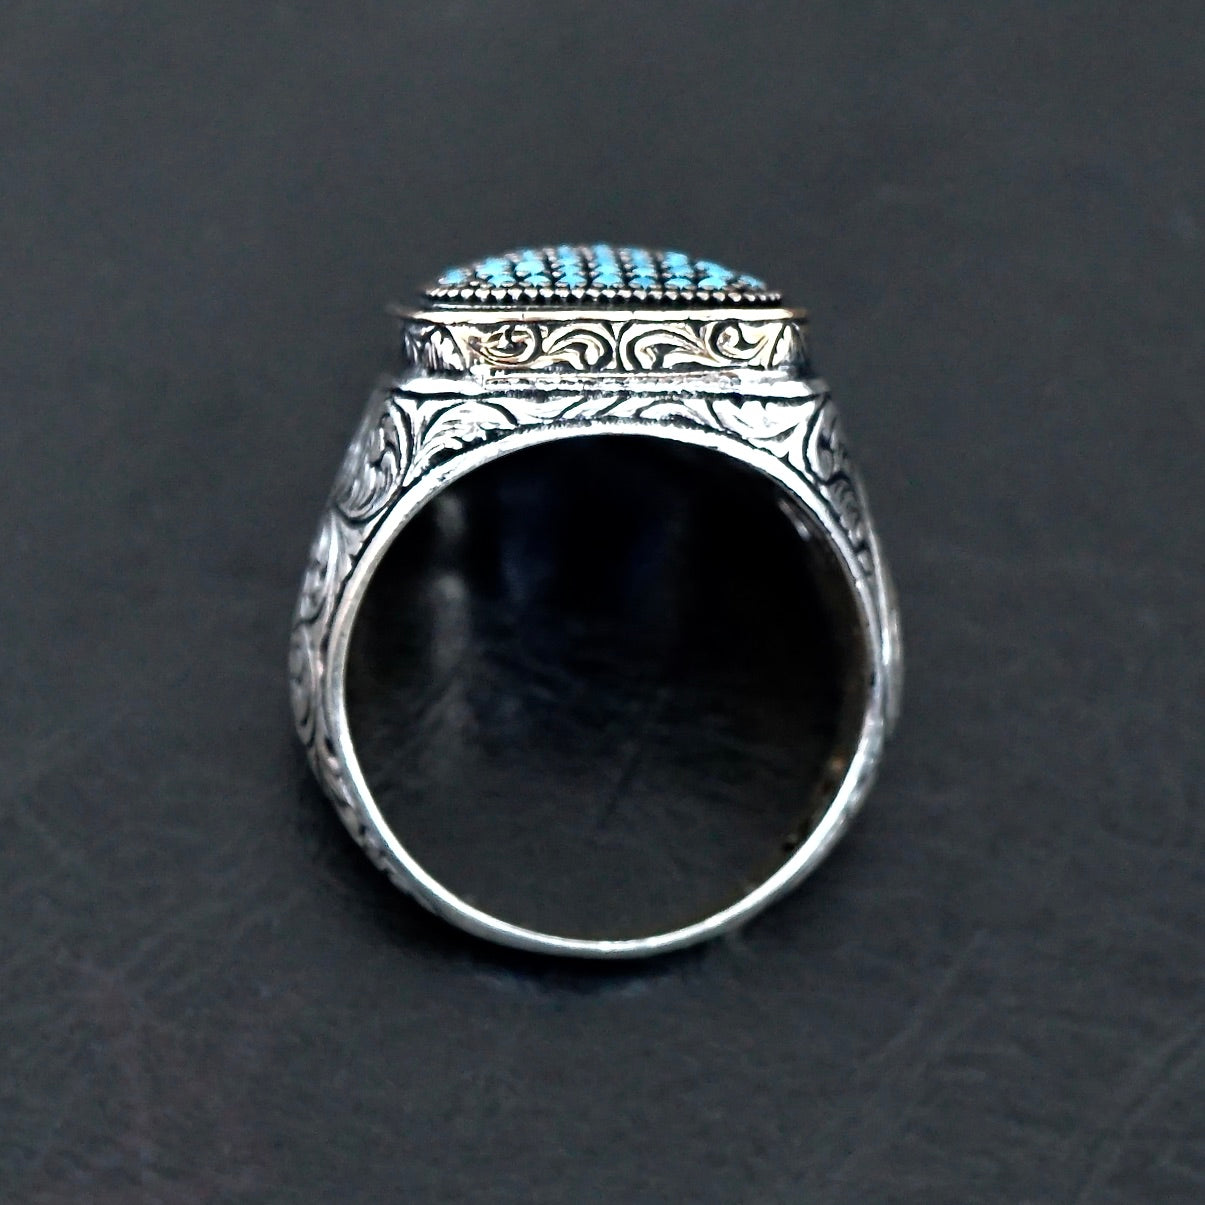 925 Sterling Silver Men's Ring Turquoise pave signet micro setting Handcrafted Unique Jewelry